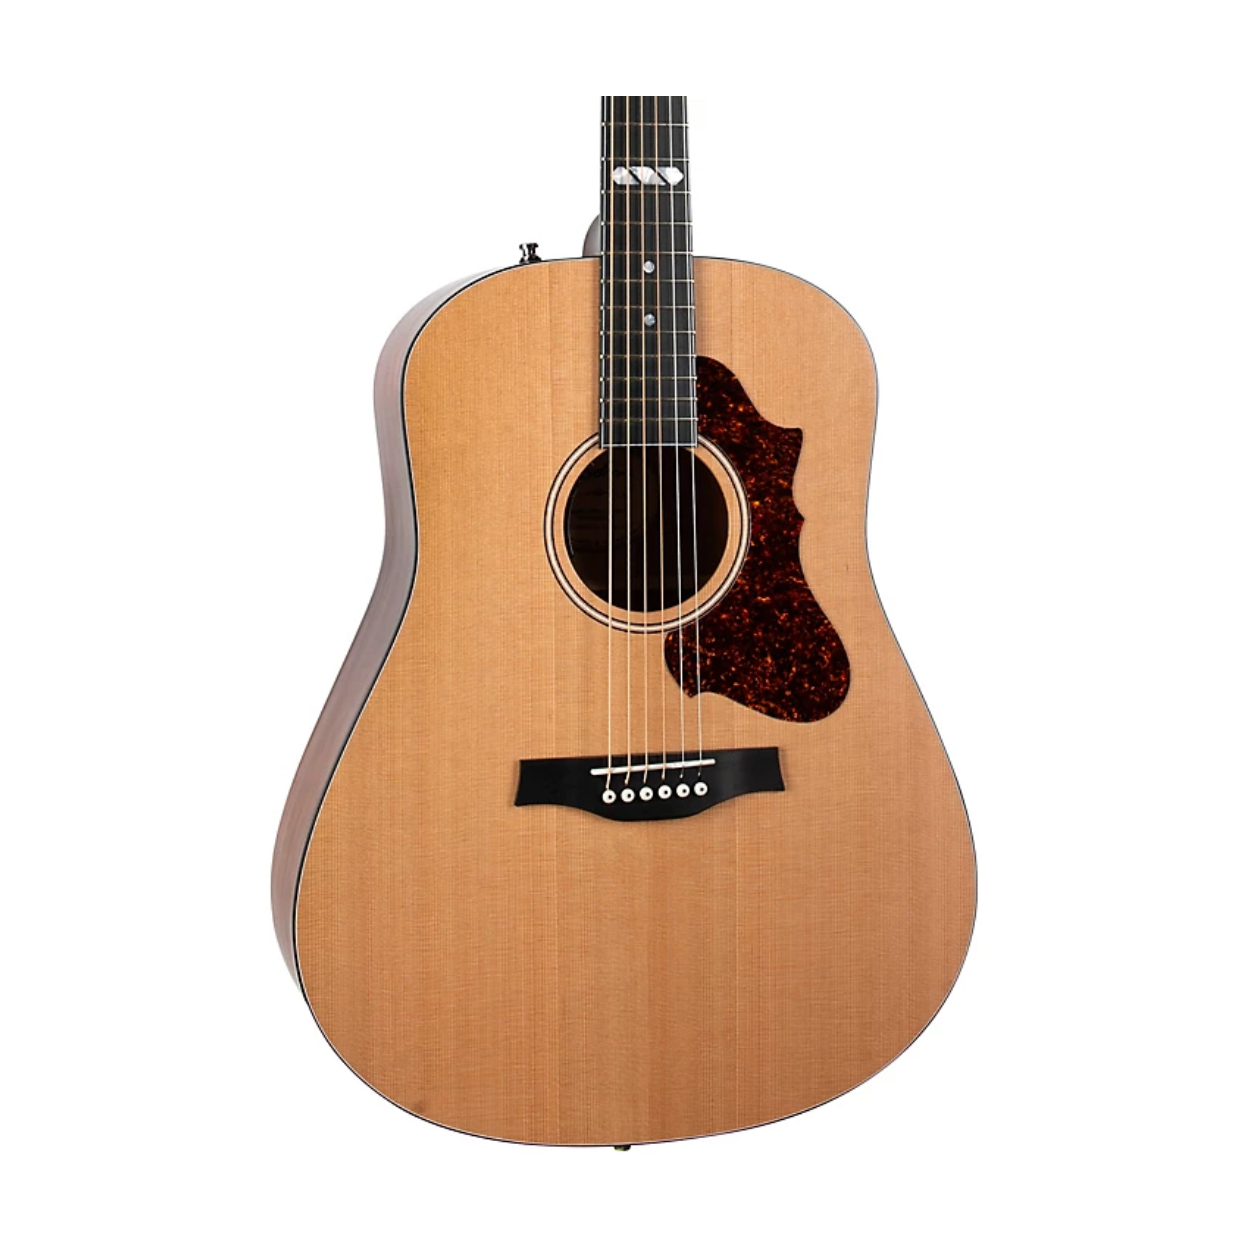 Godin Metropolis Ltd Natural Hg Eq Full Solid Acoustic Guitar With Tric Case High Gloss